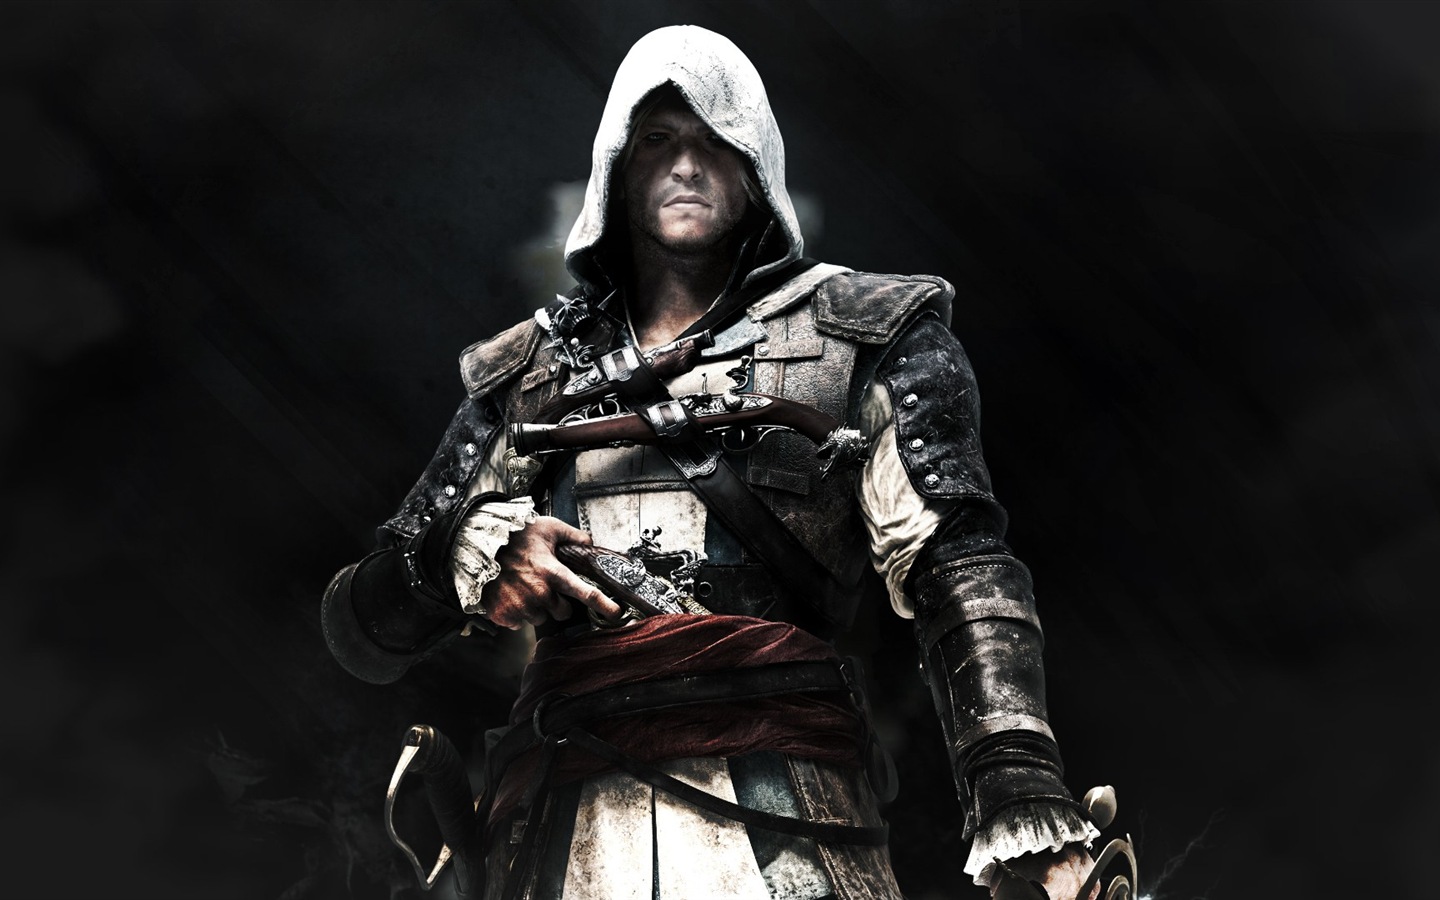 Creed IV Assassin: Black Flag HD wallpapers #10 - 1440x900